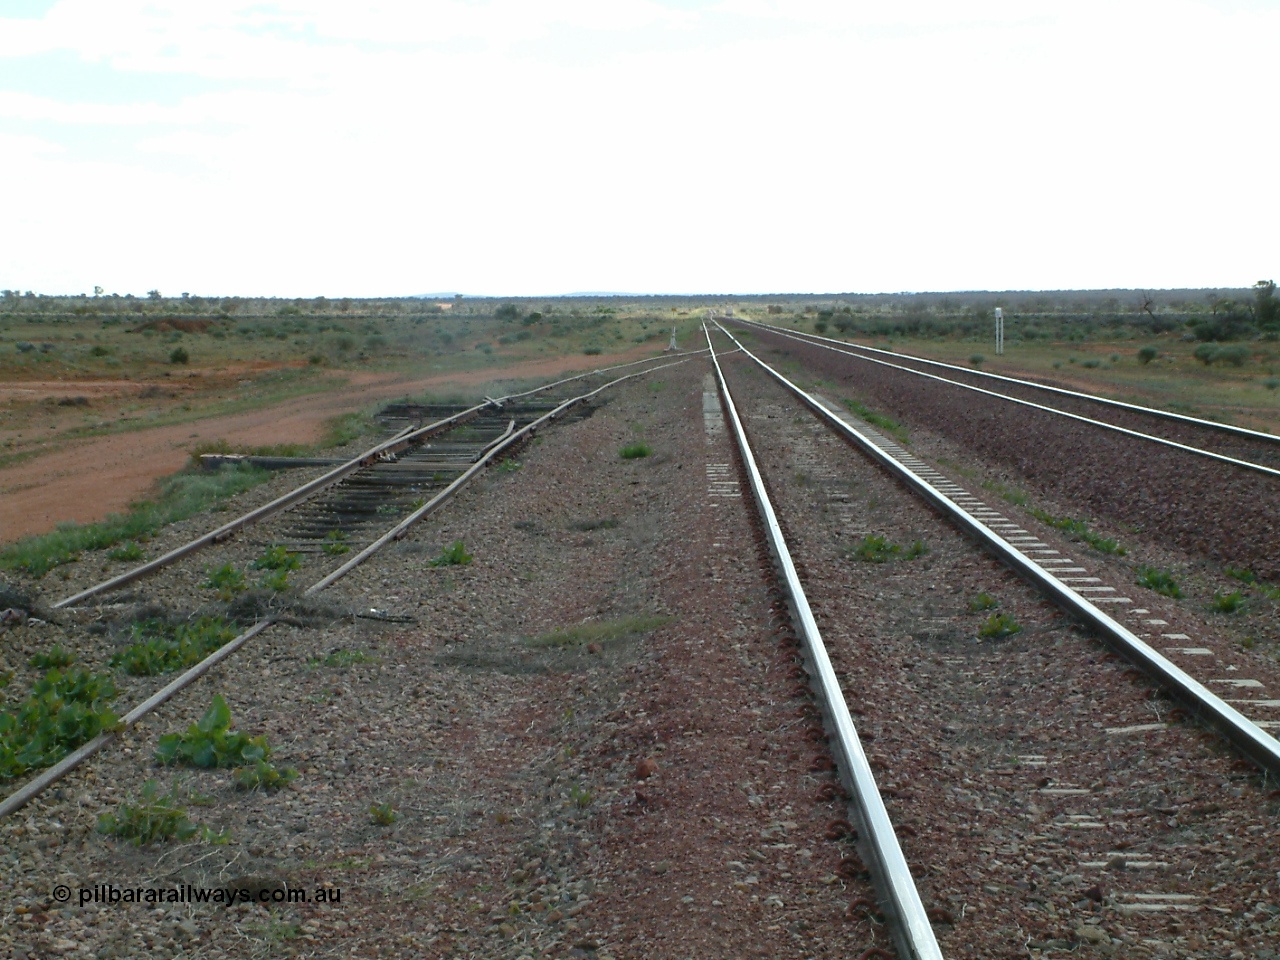 030415 150437
Ferguson, located at the 469 km on the Trans Australian Railway, looking west along the 1800 metre long crossing loop, siding point work on timber sleepers for west end of goods siding with the remains of another set of points. [url=https://goo.gl/maps/XNaMGCNxZ4yv7Lrr9]GeoData location[/url].
